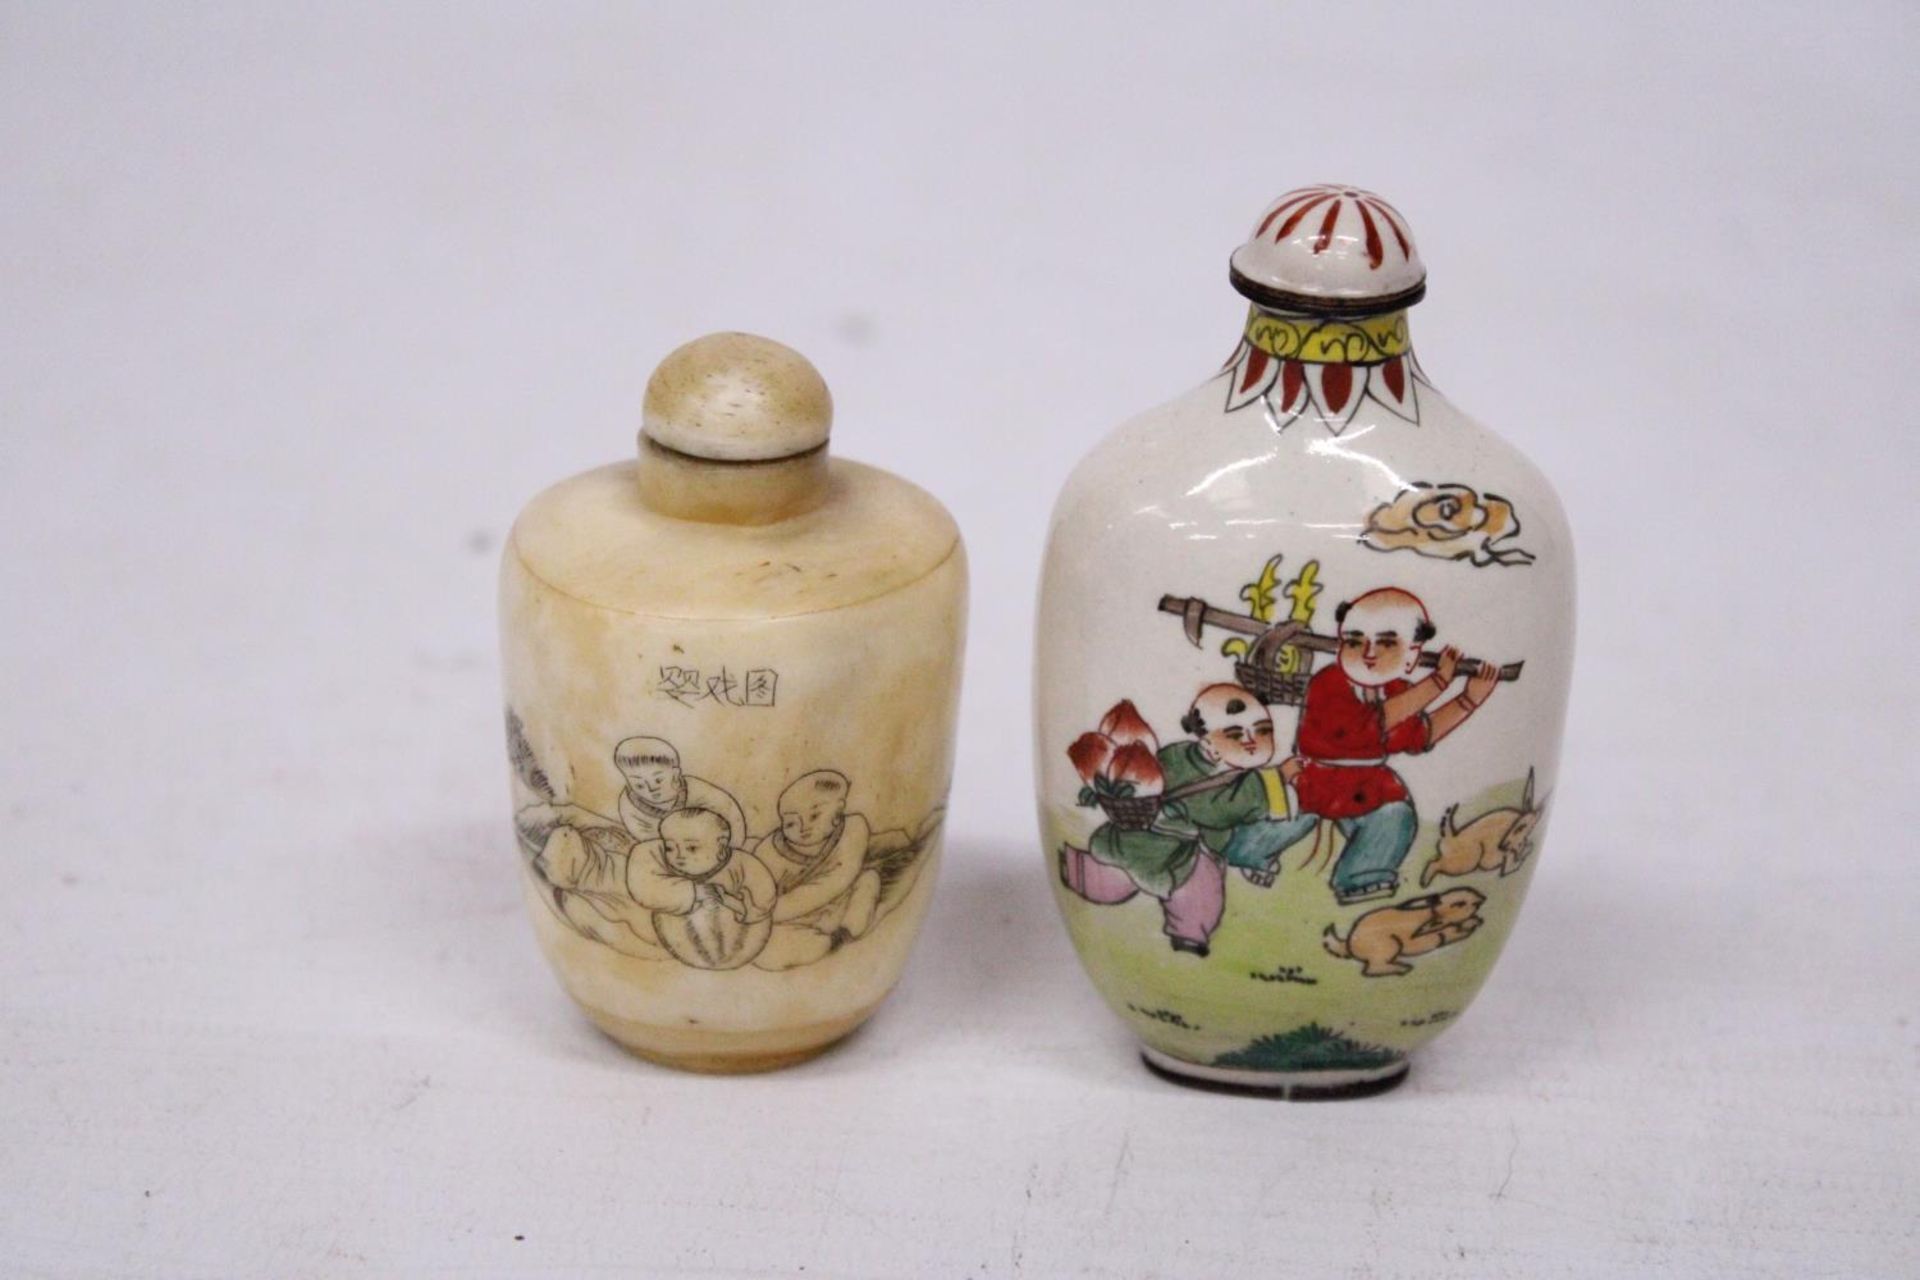 AN ANTIQUE CHINESE CLOISONNE ENAMELLED SNUFF/SCENT BOTTLE SIGNED TO THE BASE PLUS A VINTAGE - Image 3 of 7